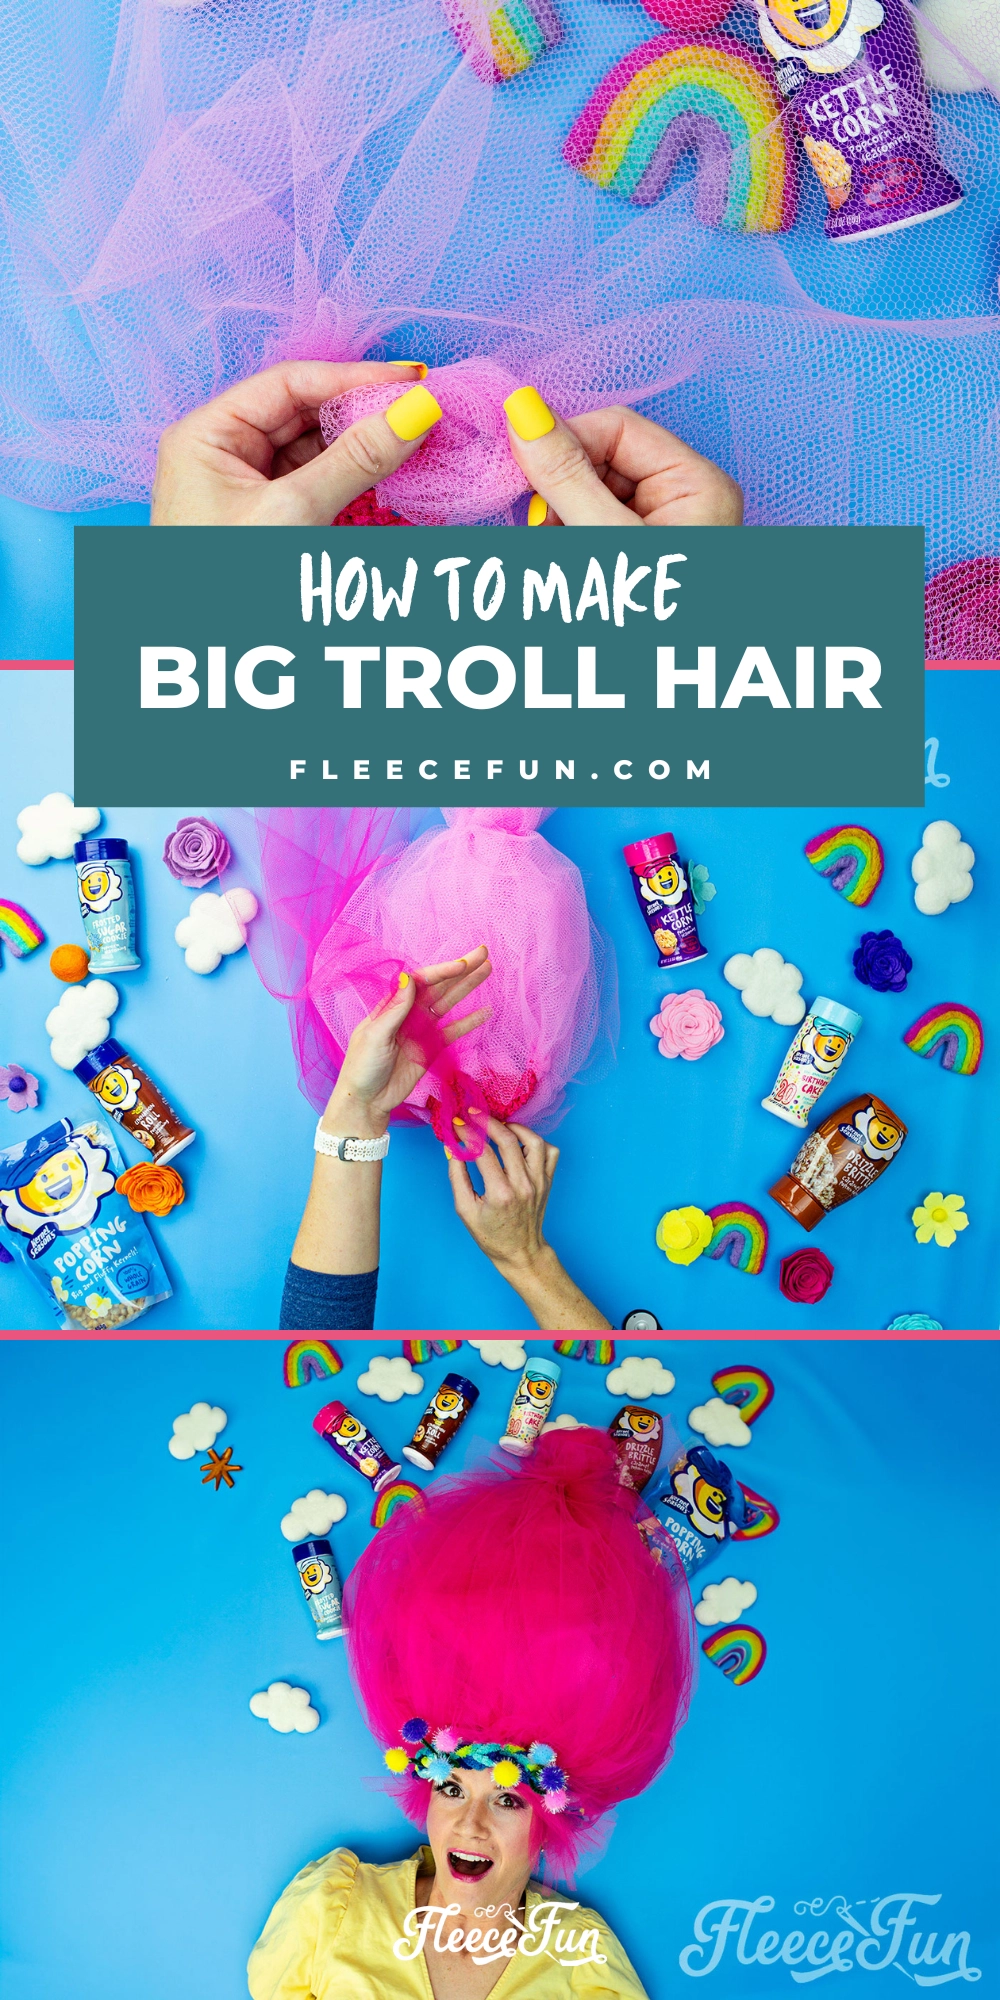 This Troll hair DIY Halloween costumes is easy to make and I love how BIG it is. Perfect for getting that troll look. Love this Costume ideas DIY.